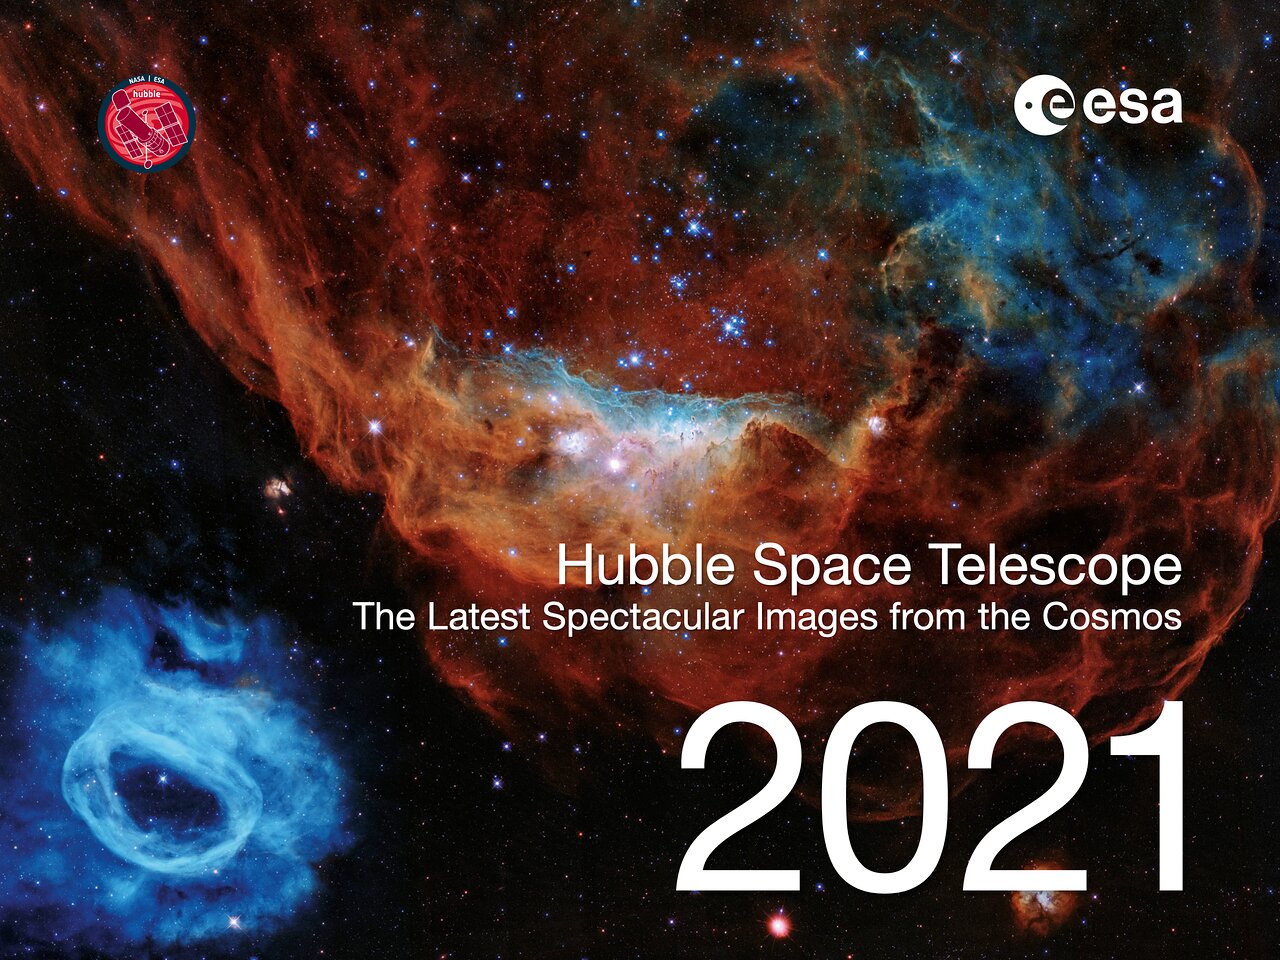 Hubble Space Telescope Calendar 2021 The Latest Spectacular Images